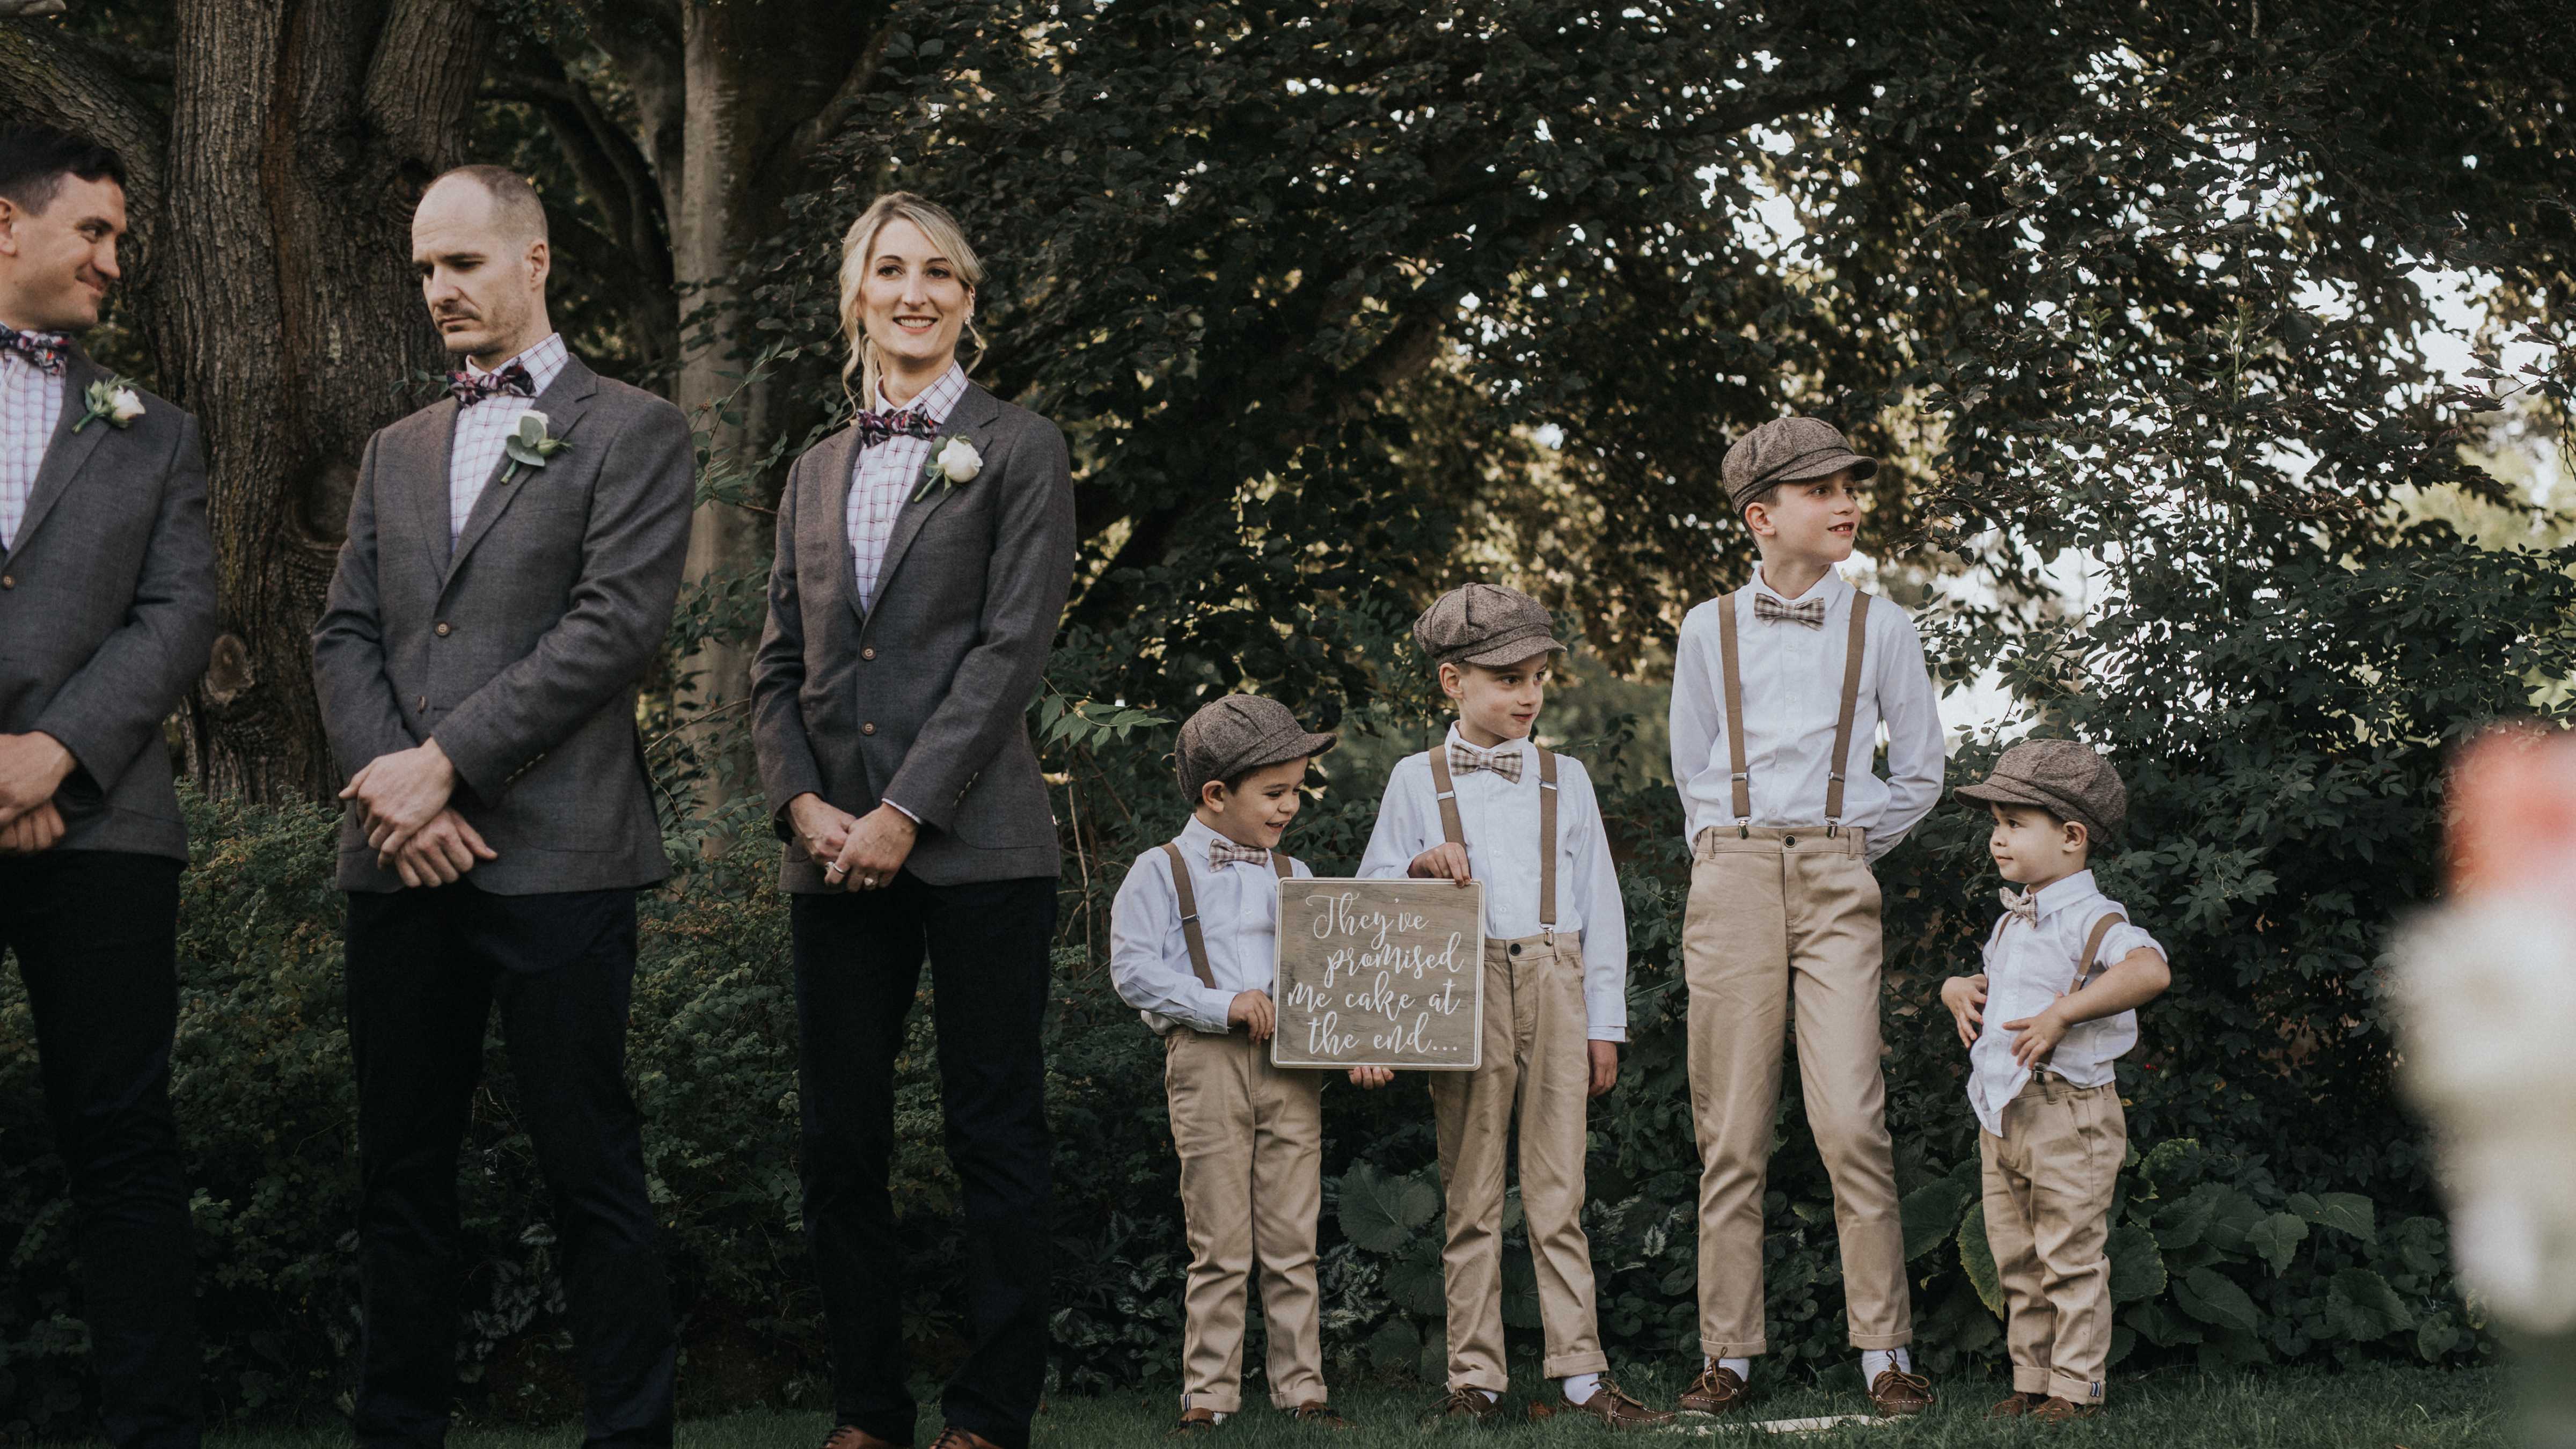 One side of a bridal party including four boys dressed in brown trousers and suspenders stand in front of shrubberies and trees. The boys are holding a wooden sign that says “They&rquo;ve promised me cake at the end”. Photo: Cassie Sullivan.